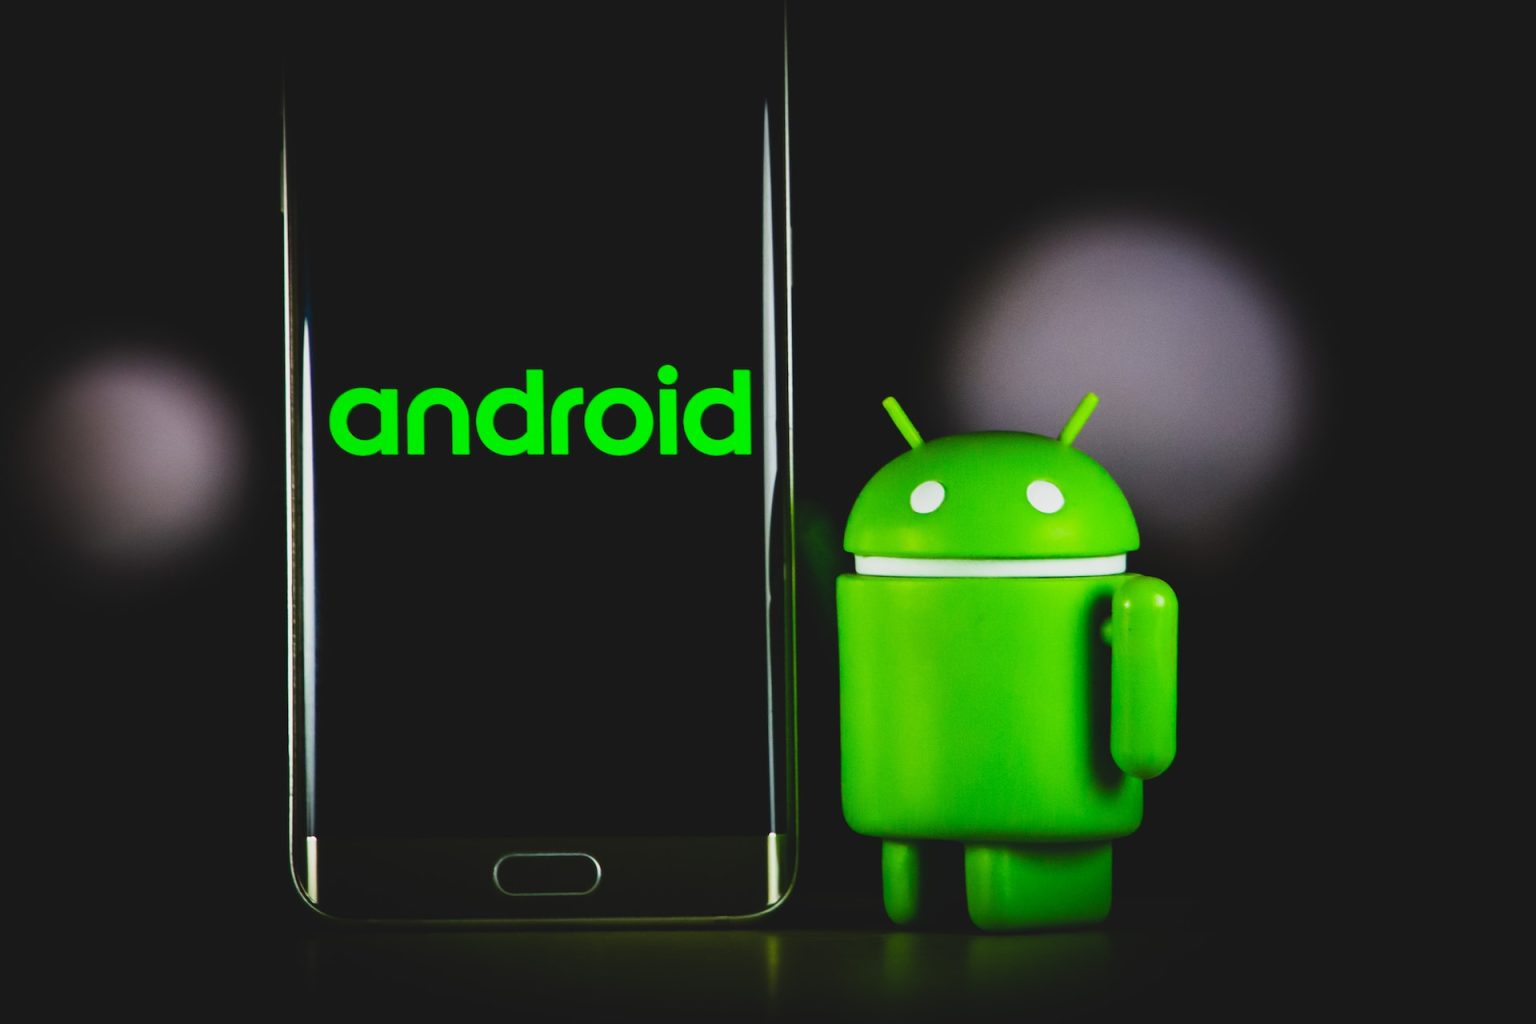 SpinOk Trojan Compromises 421 Million Android Devices